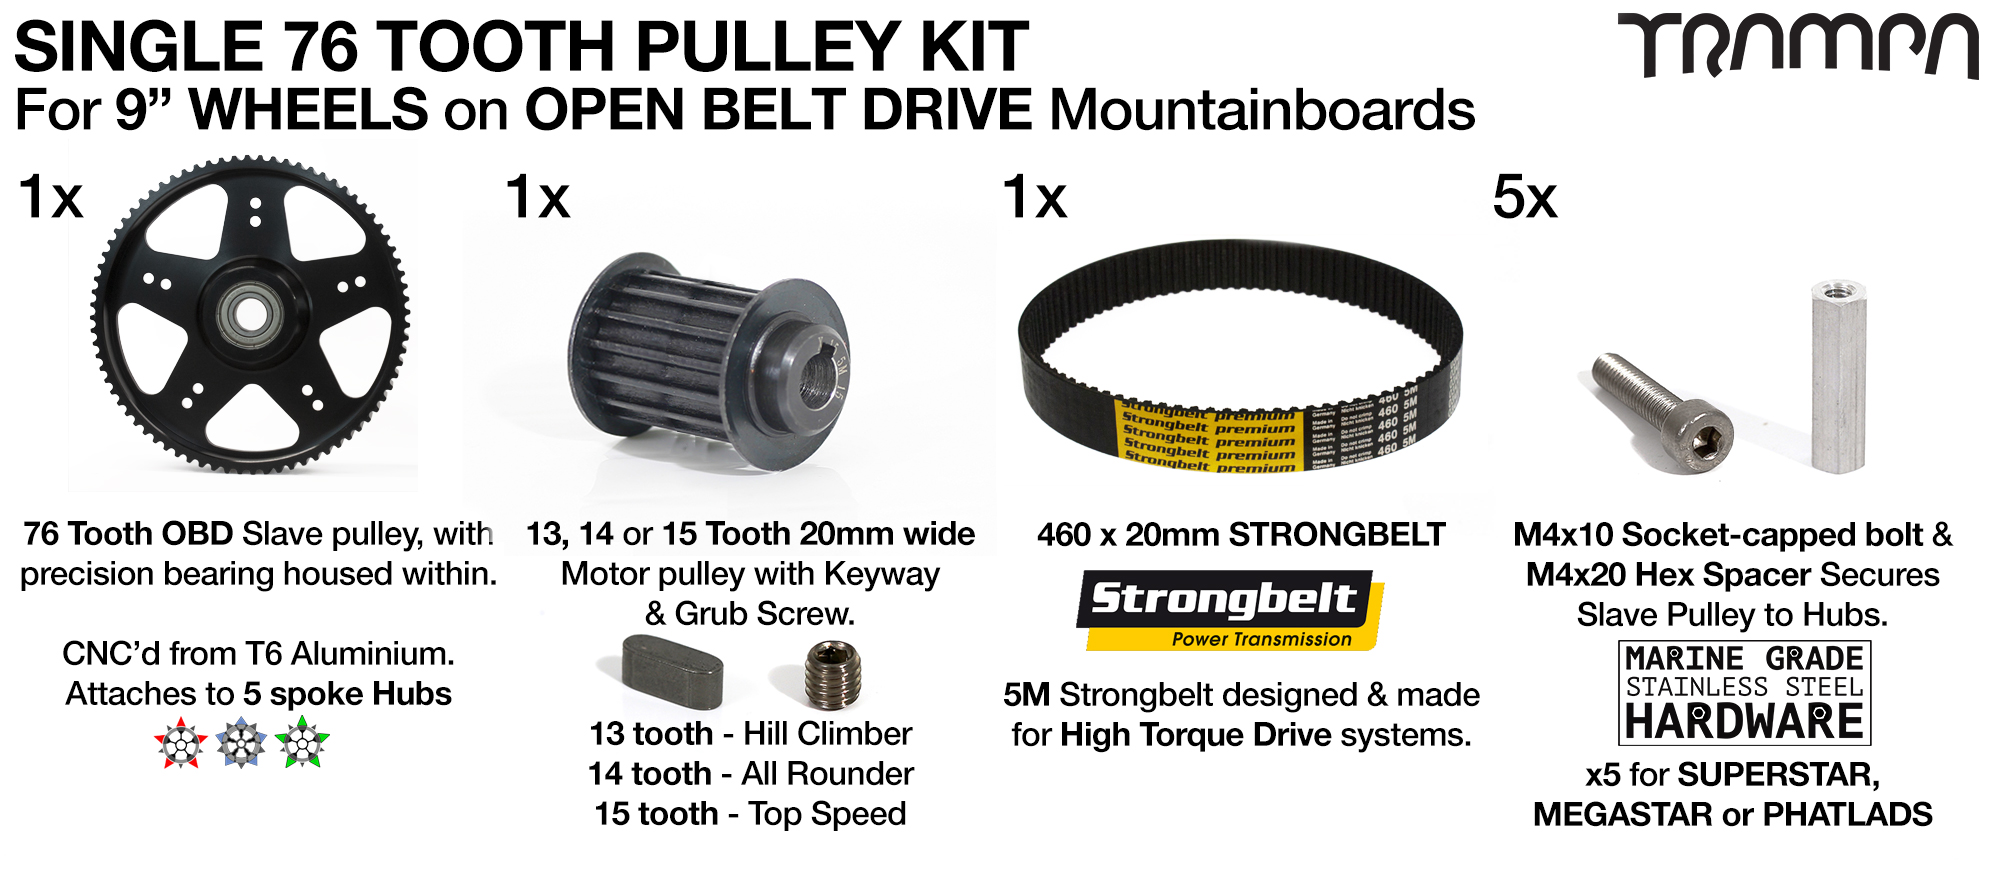 76T Open Belt Drive 76 Tooth Pulley Kit with 460mm x 20mm Belt for 9 Inch Wheels HIGH TORQUE - SINGLE